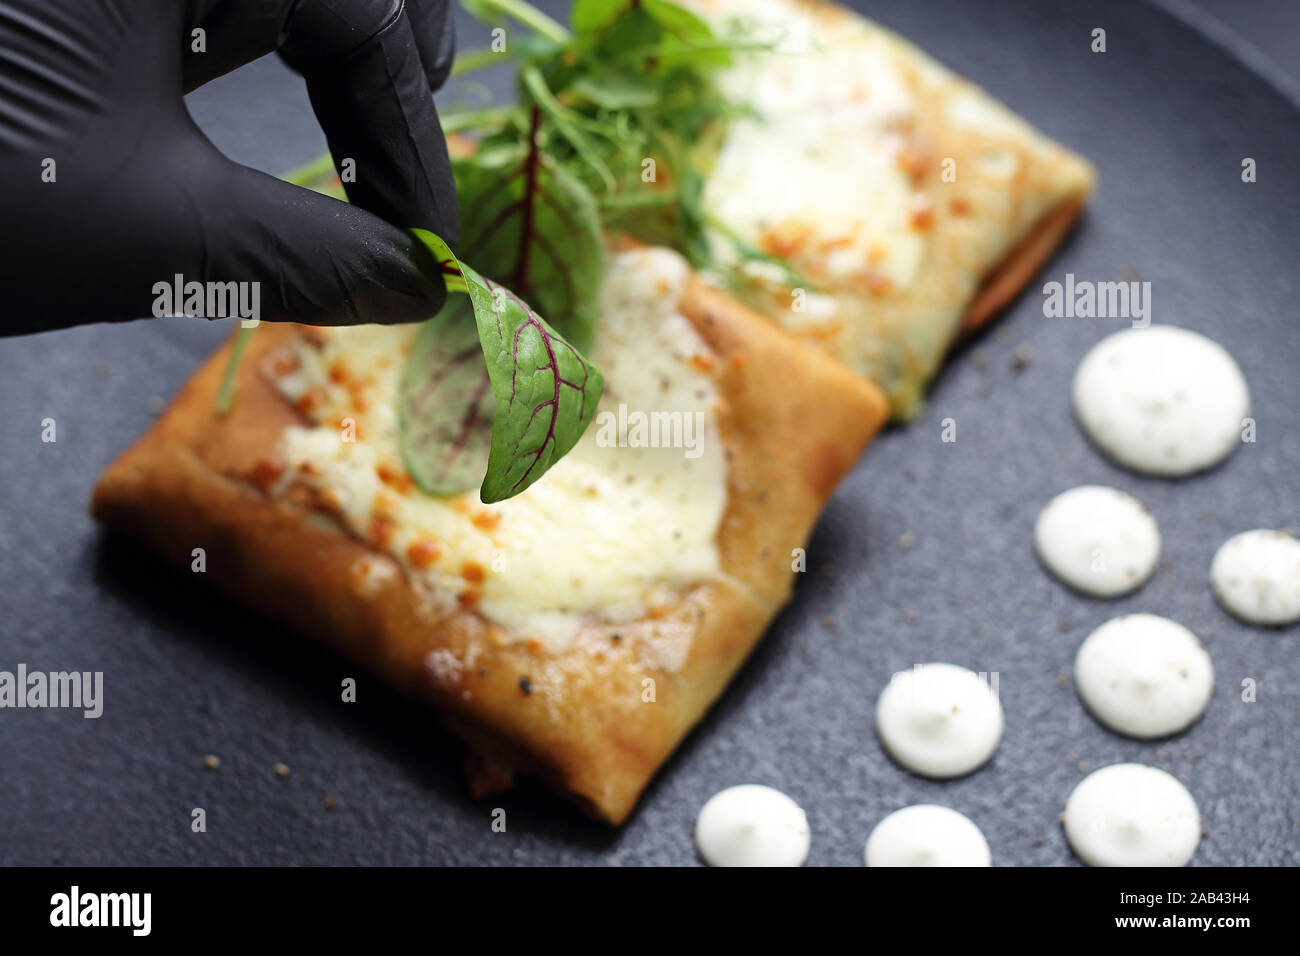 The chef decorates the plate. Serving and decorating the dish. Stock Photo